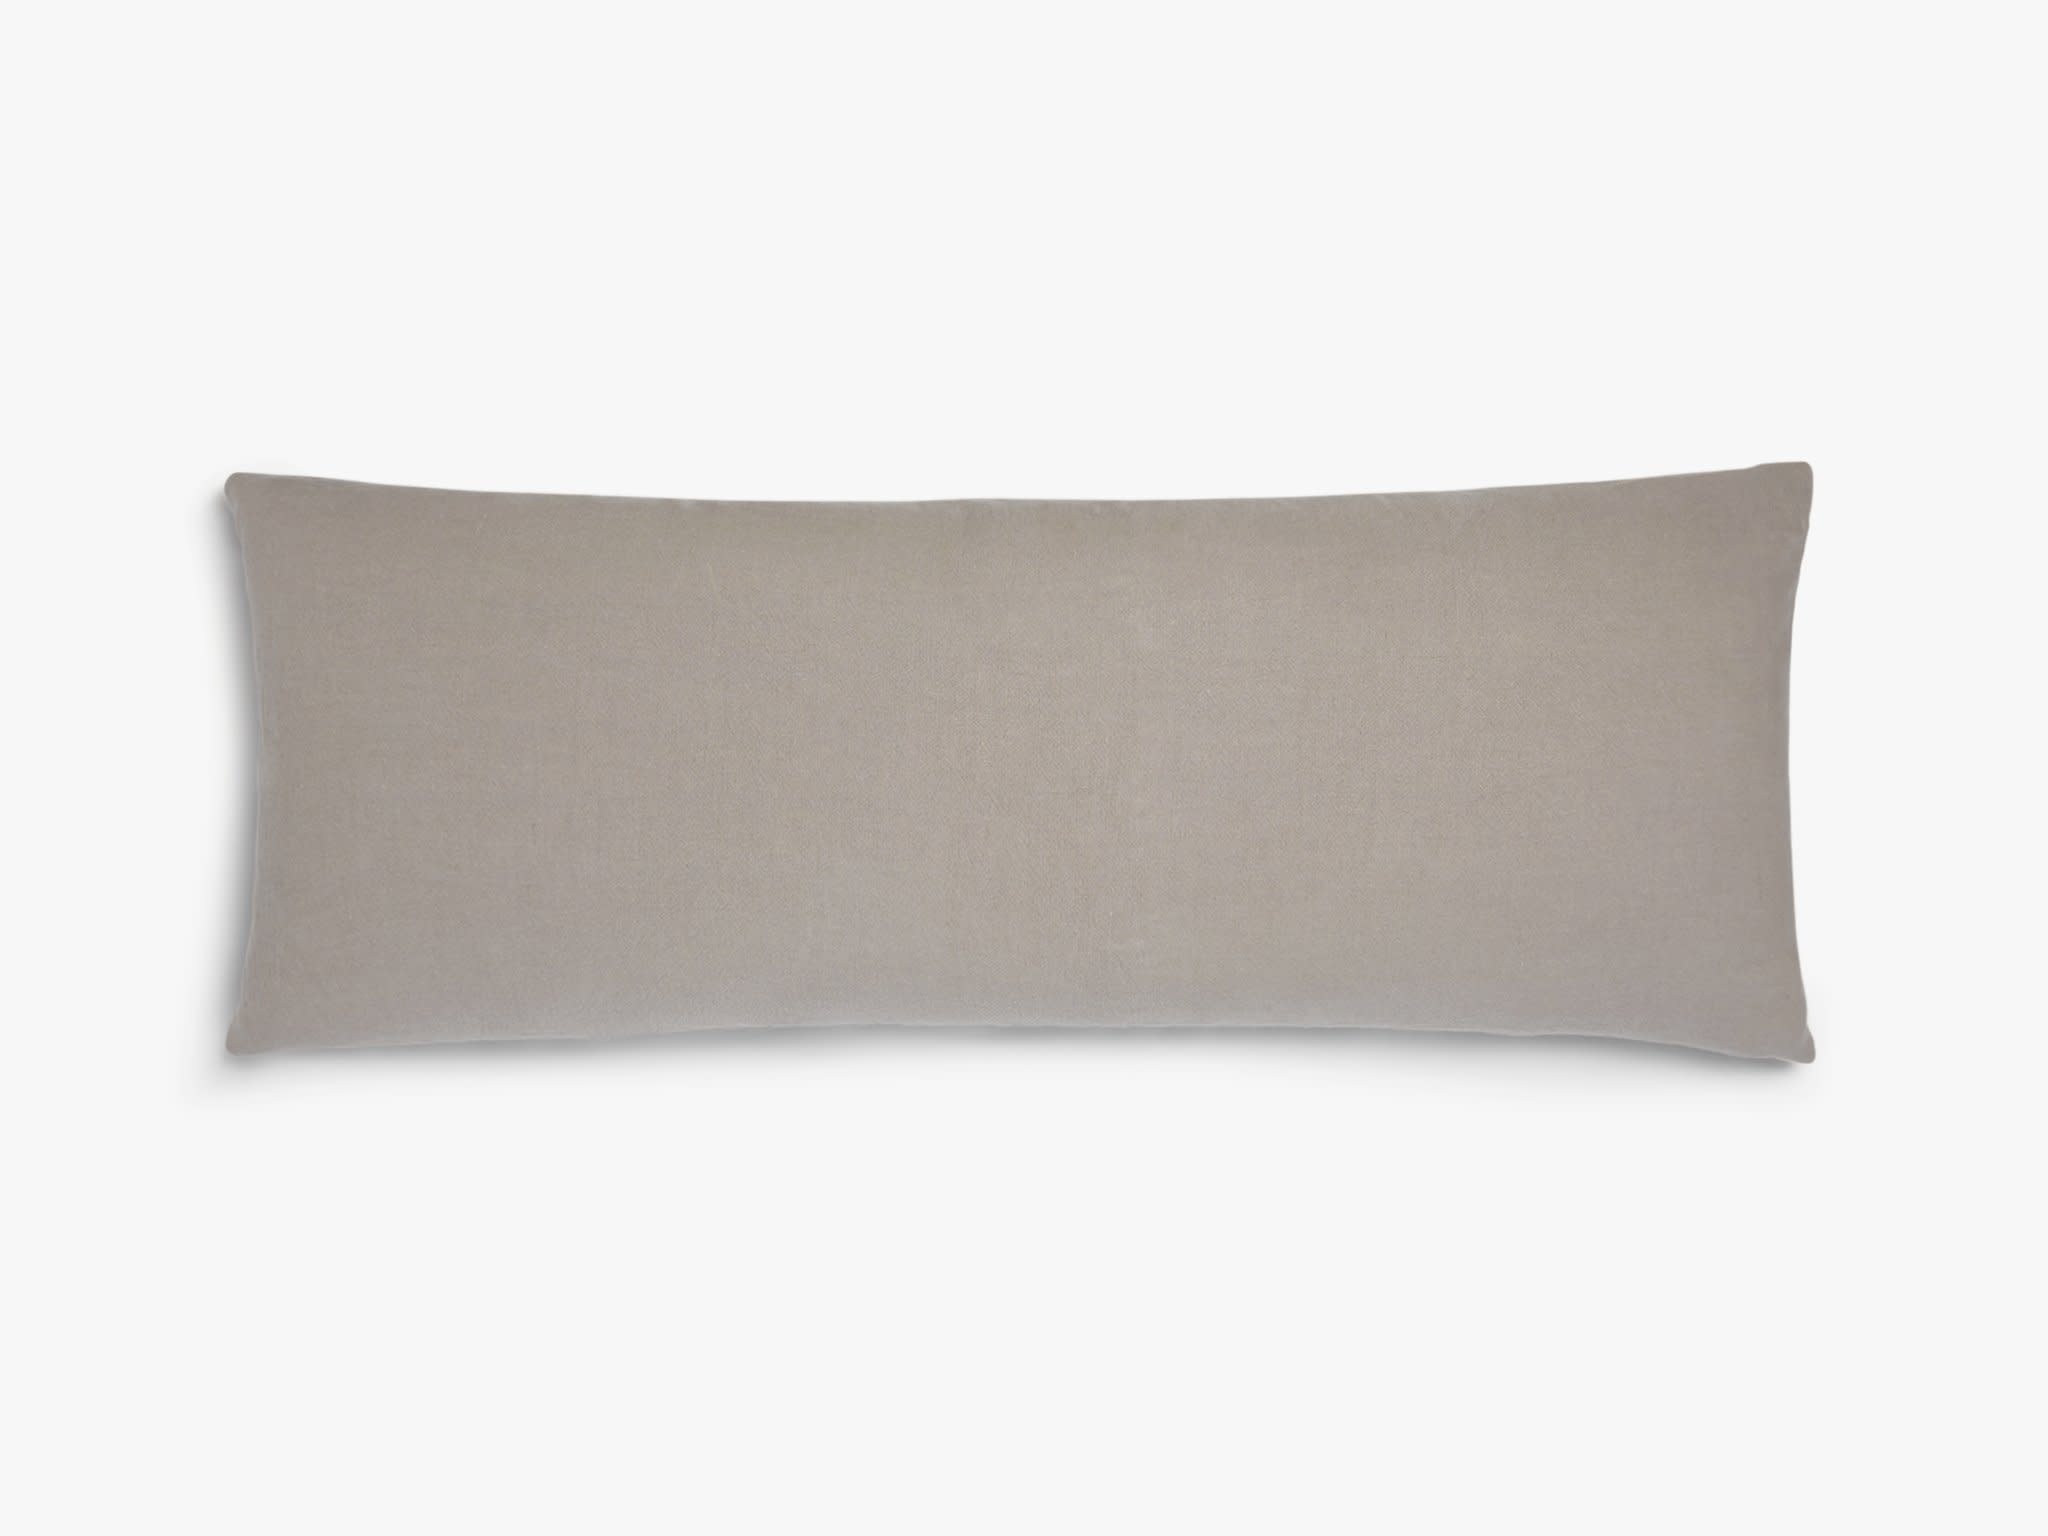 Natural Vintage Linen Body Pillow Cover Product Image